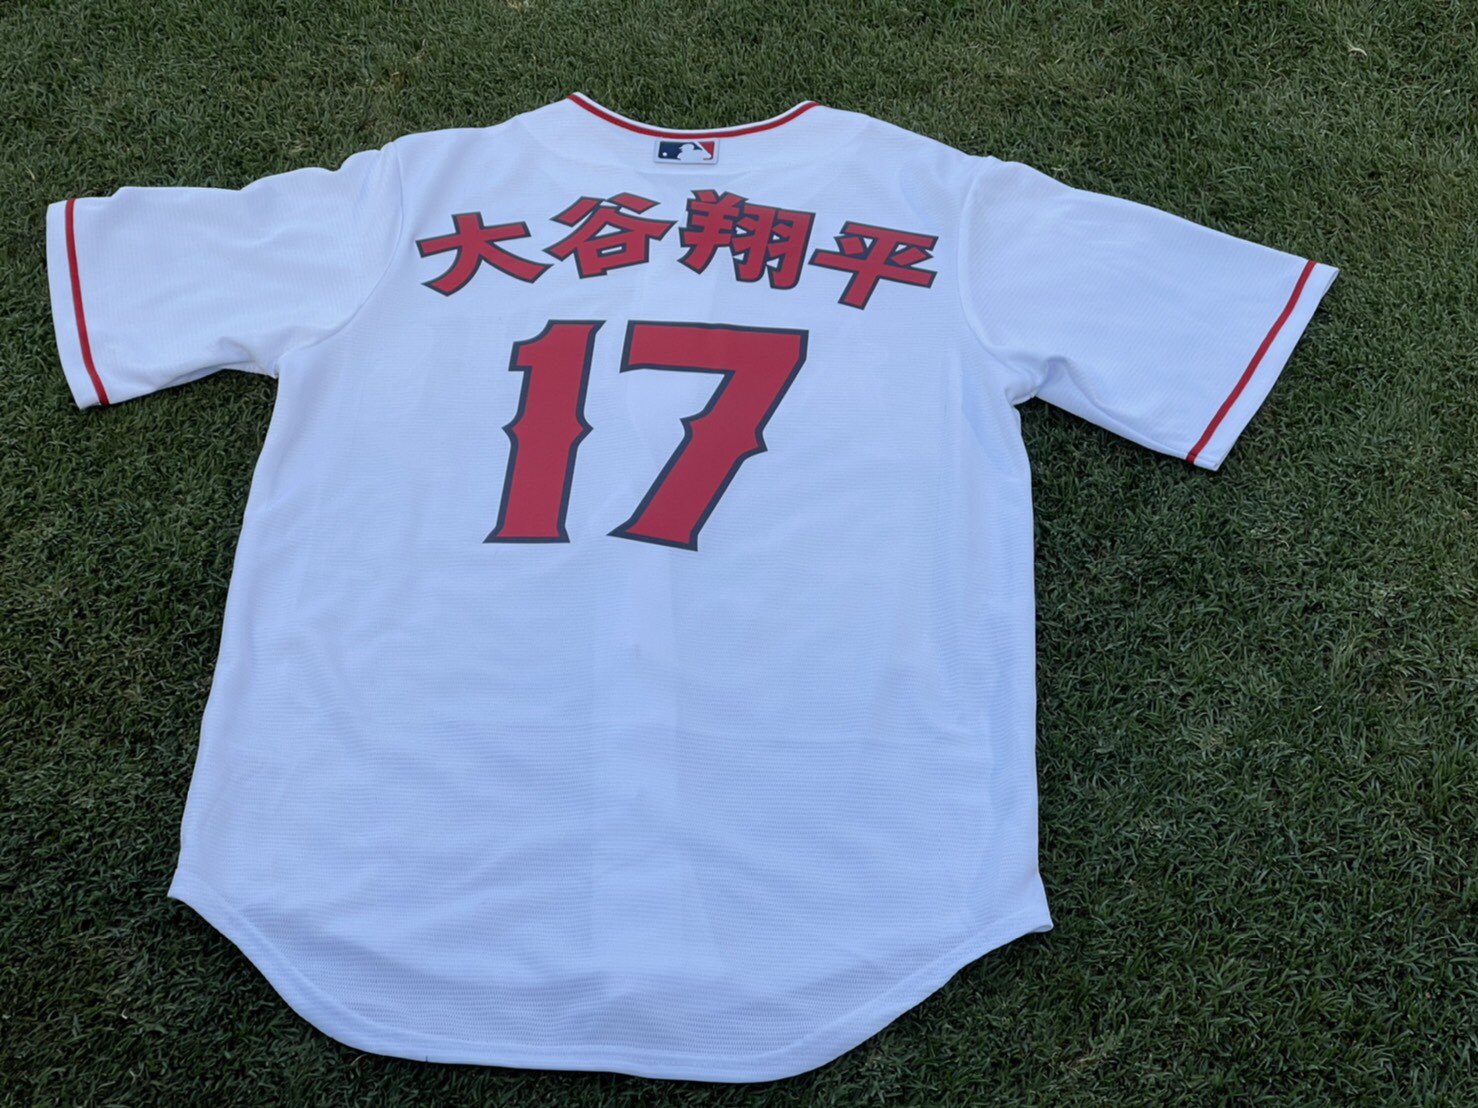 Ohtani-san on X: No one is surprised that the Ohtani Kanji